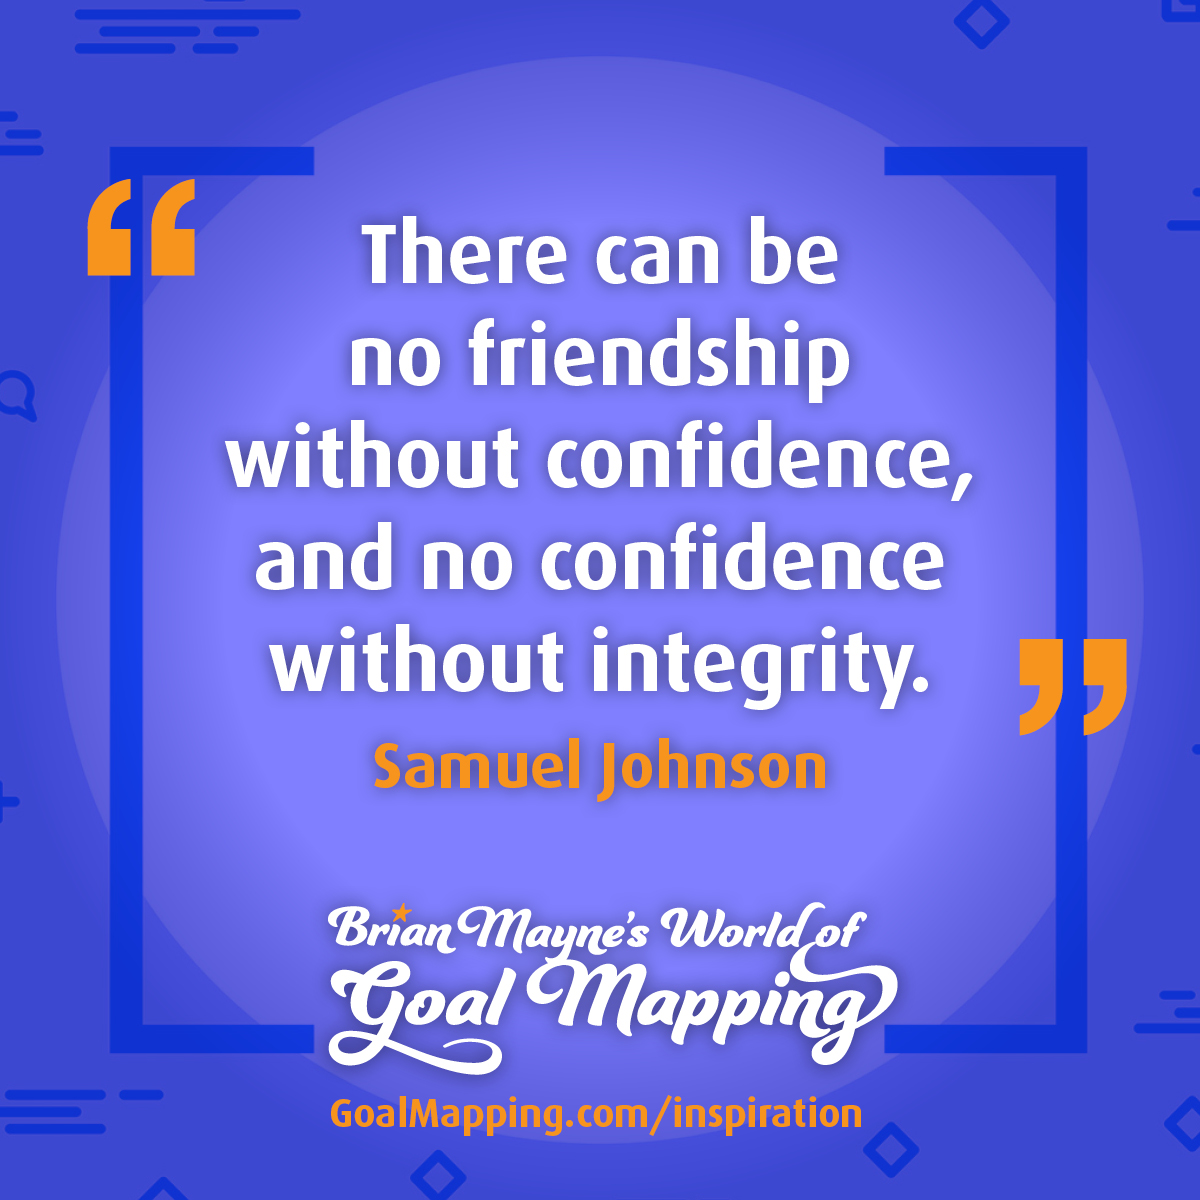 "There can be no friendship without confidence, and no confidence without integrity." Samuel Johnson